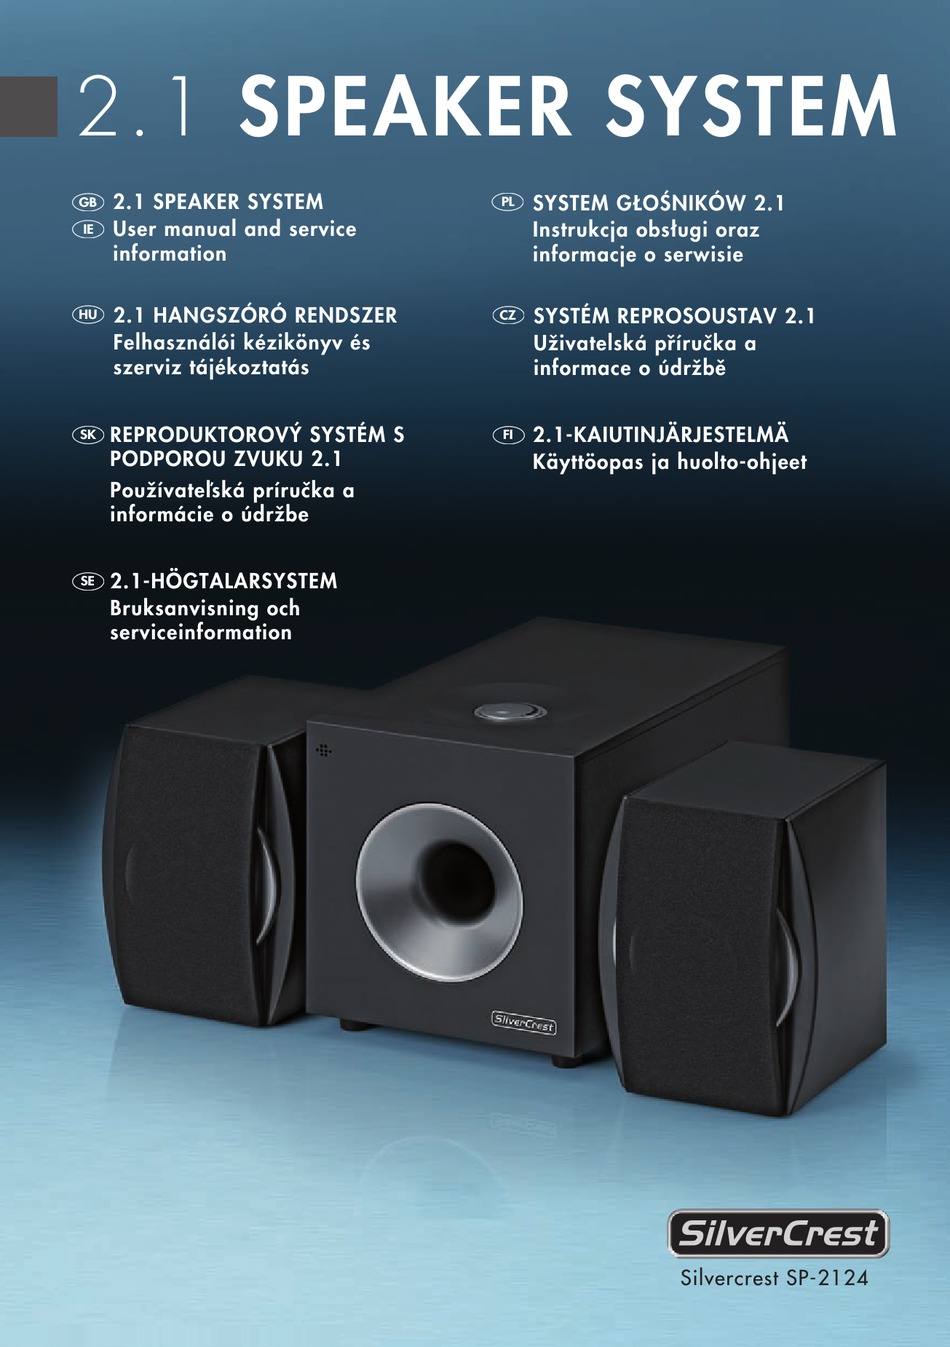 Manual | Information Using ManualsLib 7] And - Subwoofer User Service SP-2124 Silvercrest [Page The